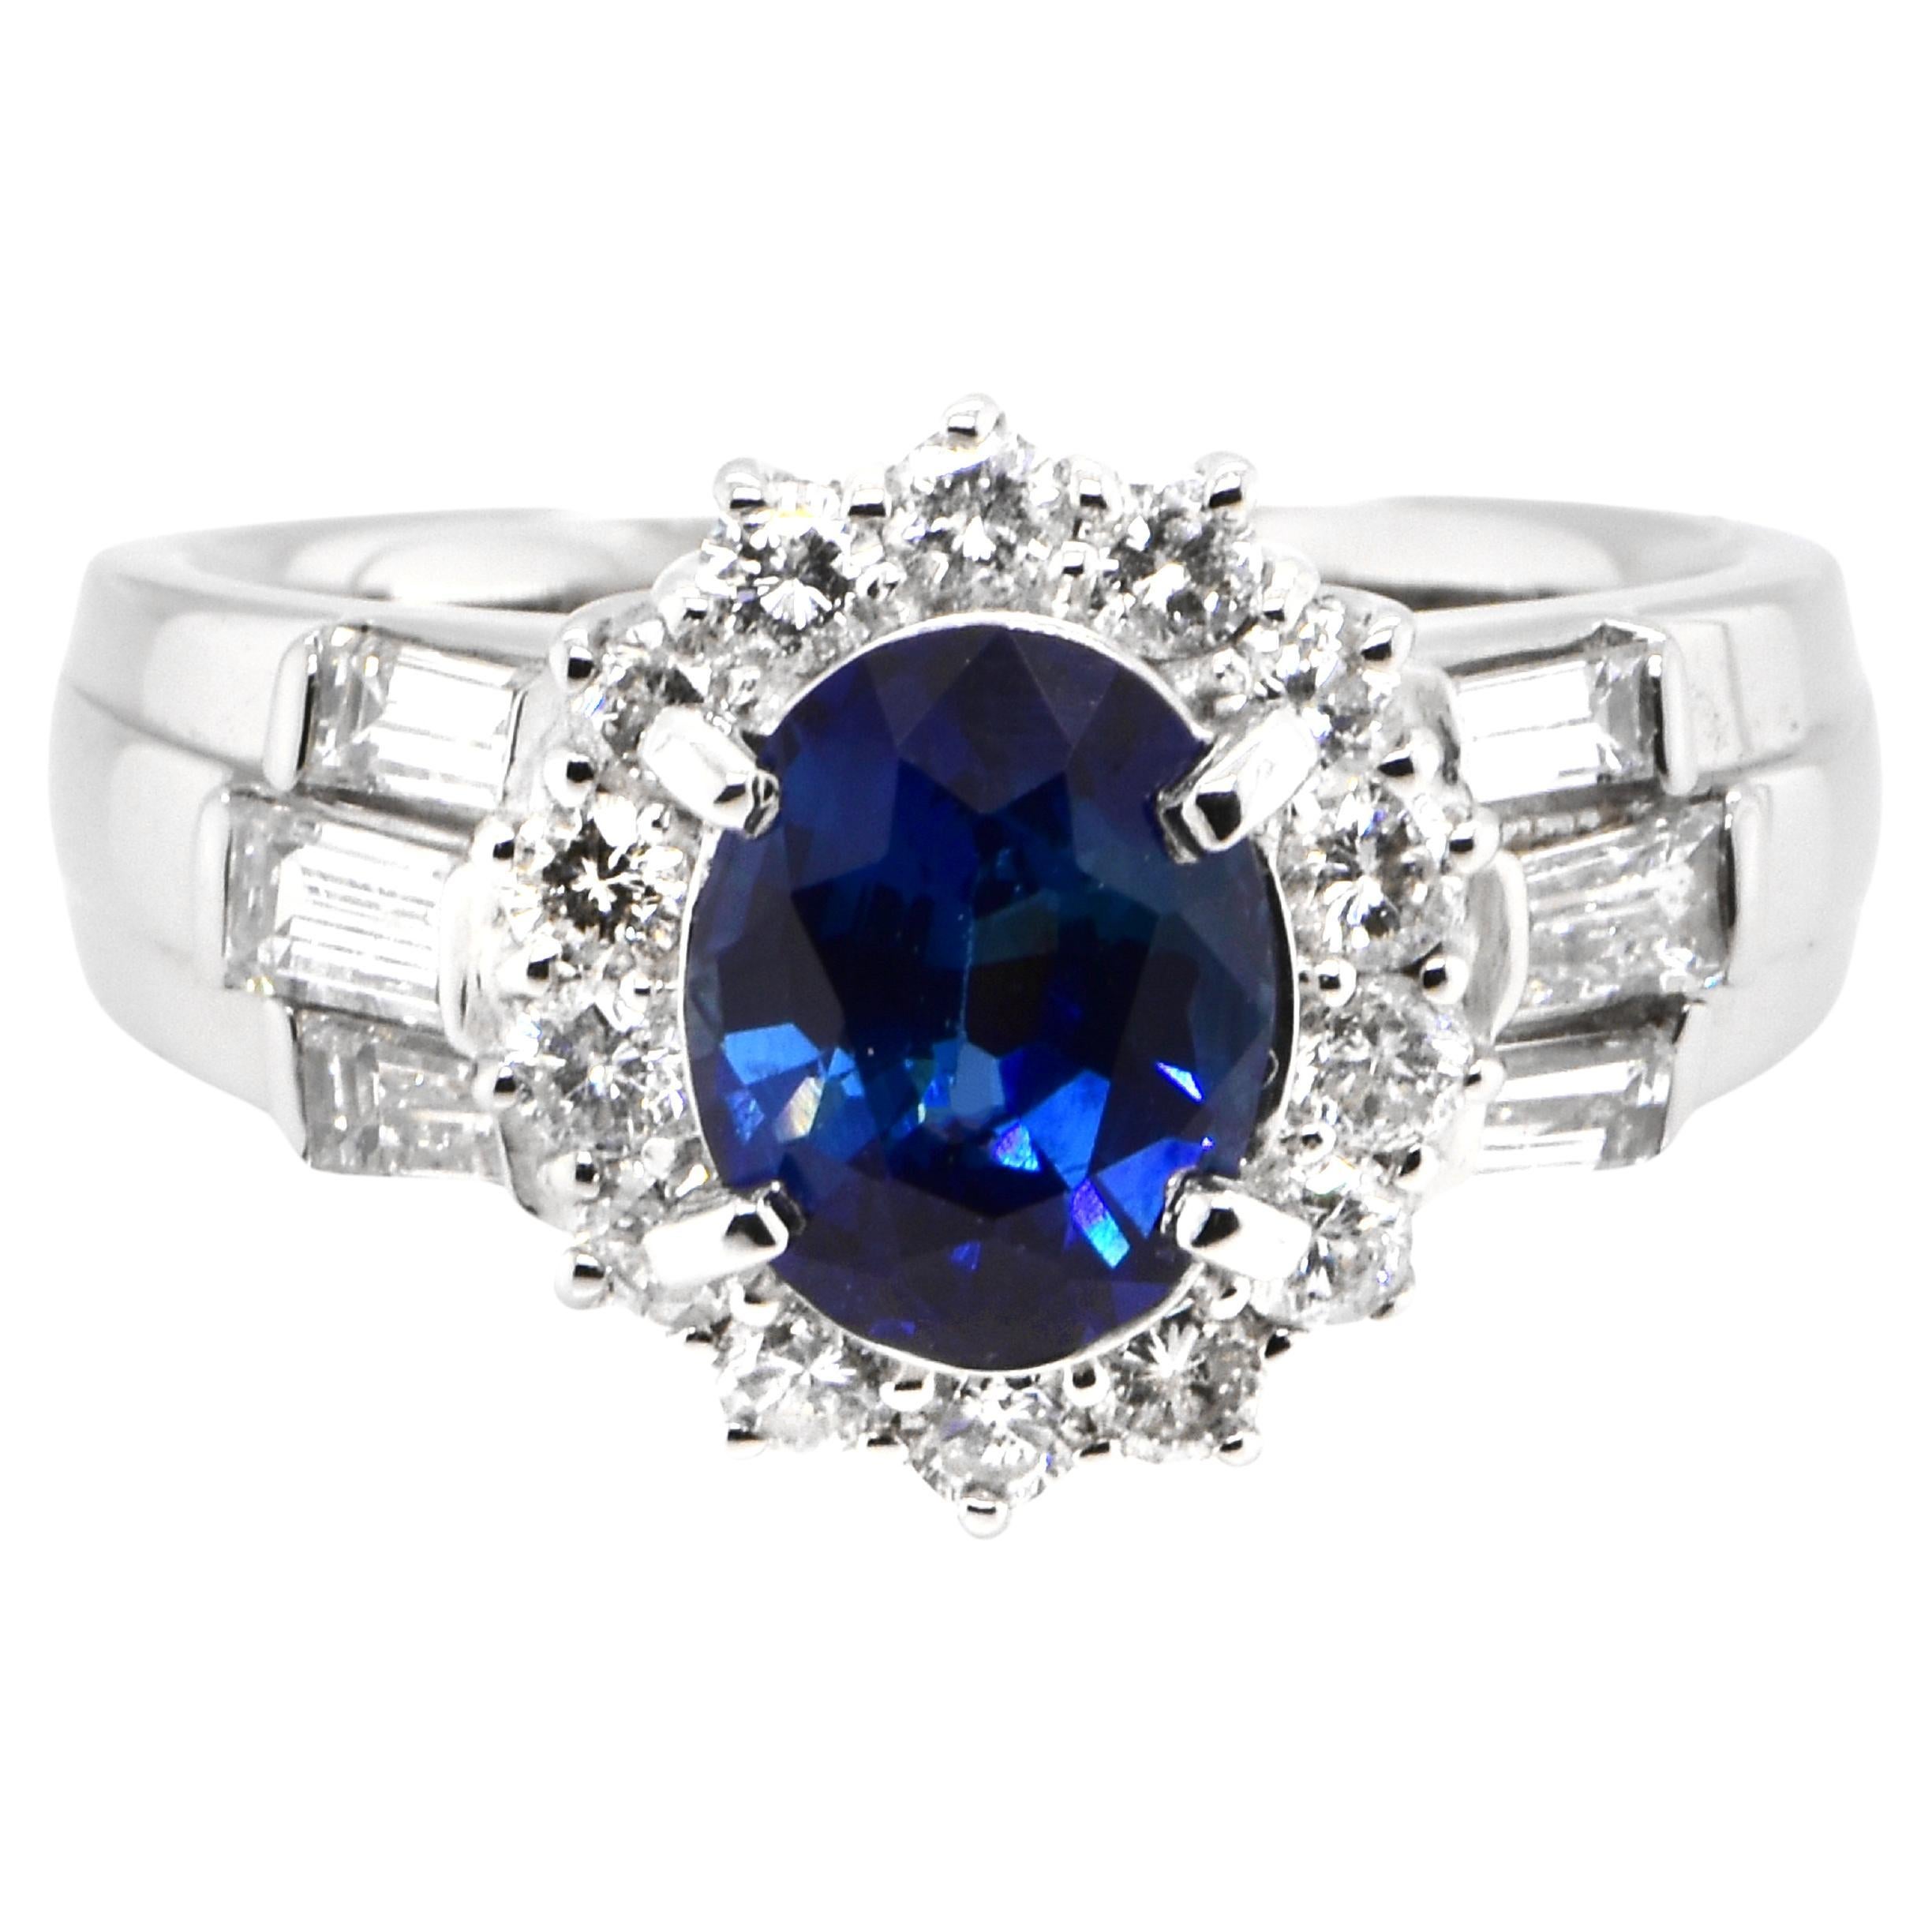 1.52 Carat Natural Royal Blue Color Sapphire and Diamond Ring Made in Platinum For Sale